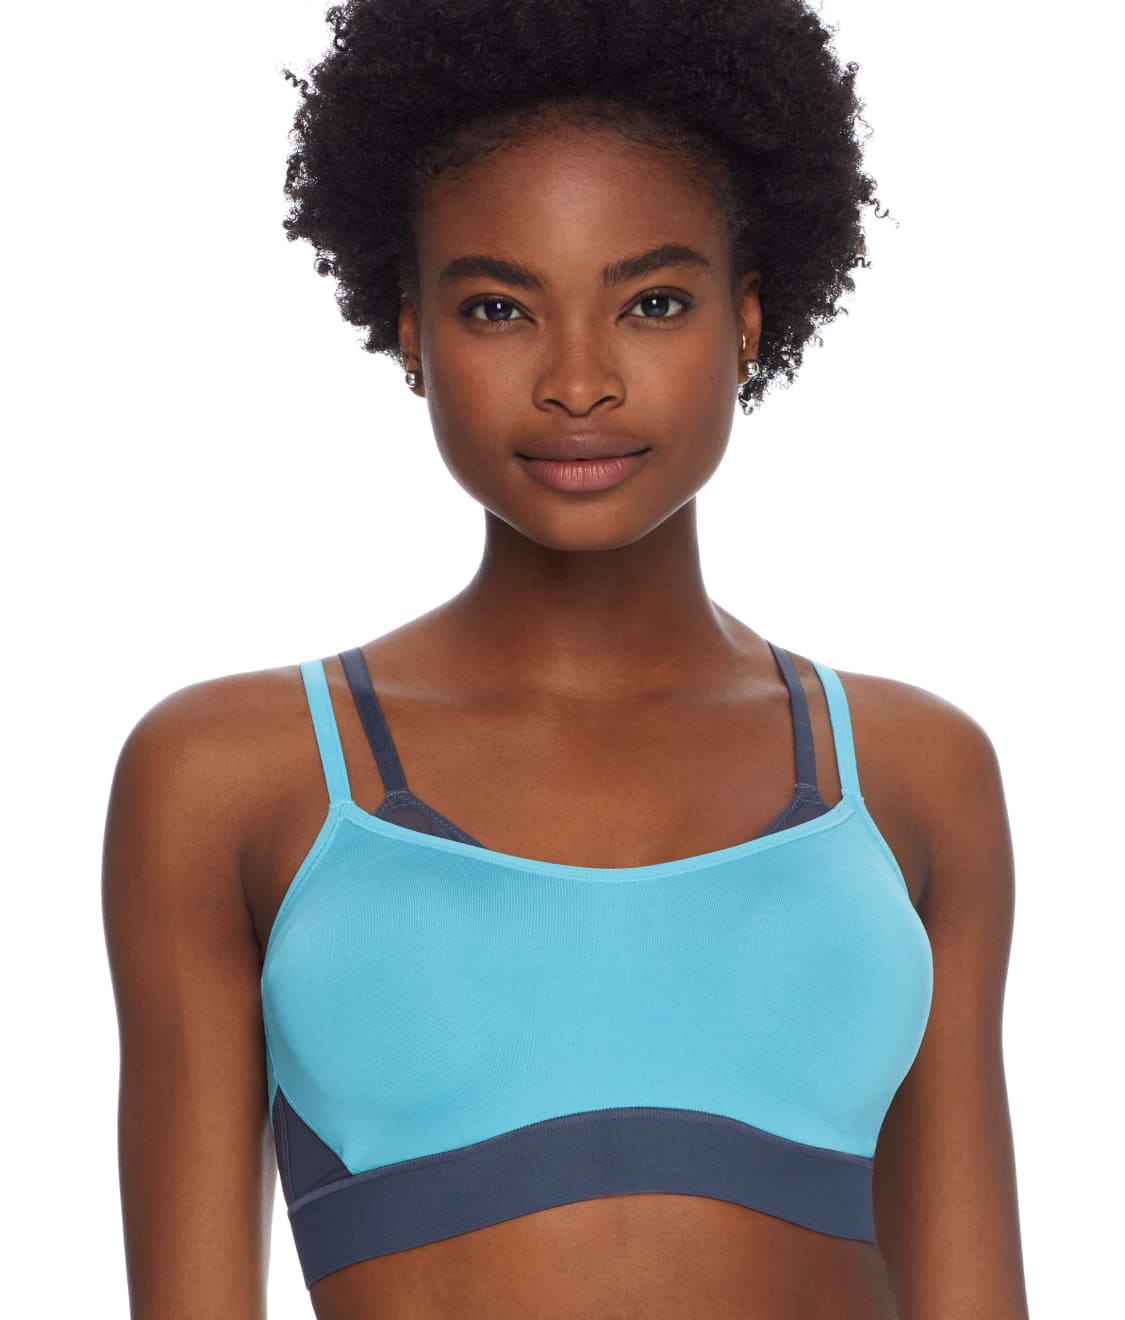 The 20 Best Bras for Small Busts That Lift, Support, and Deliver Comfort -  Yahoo Sports